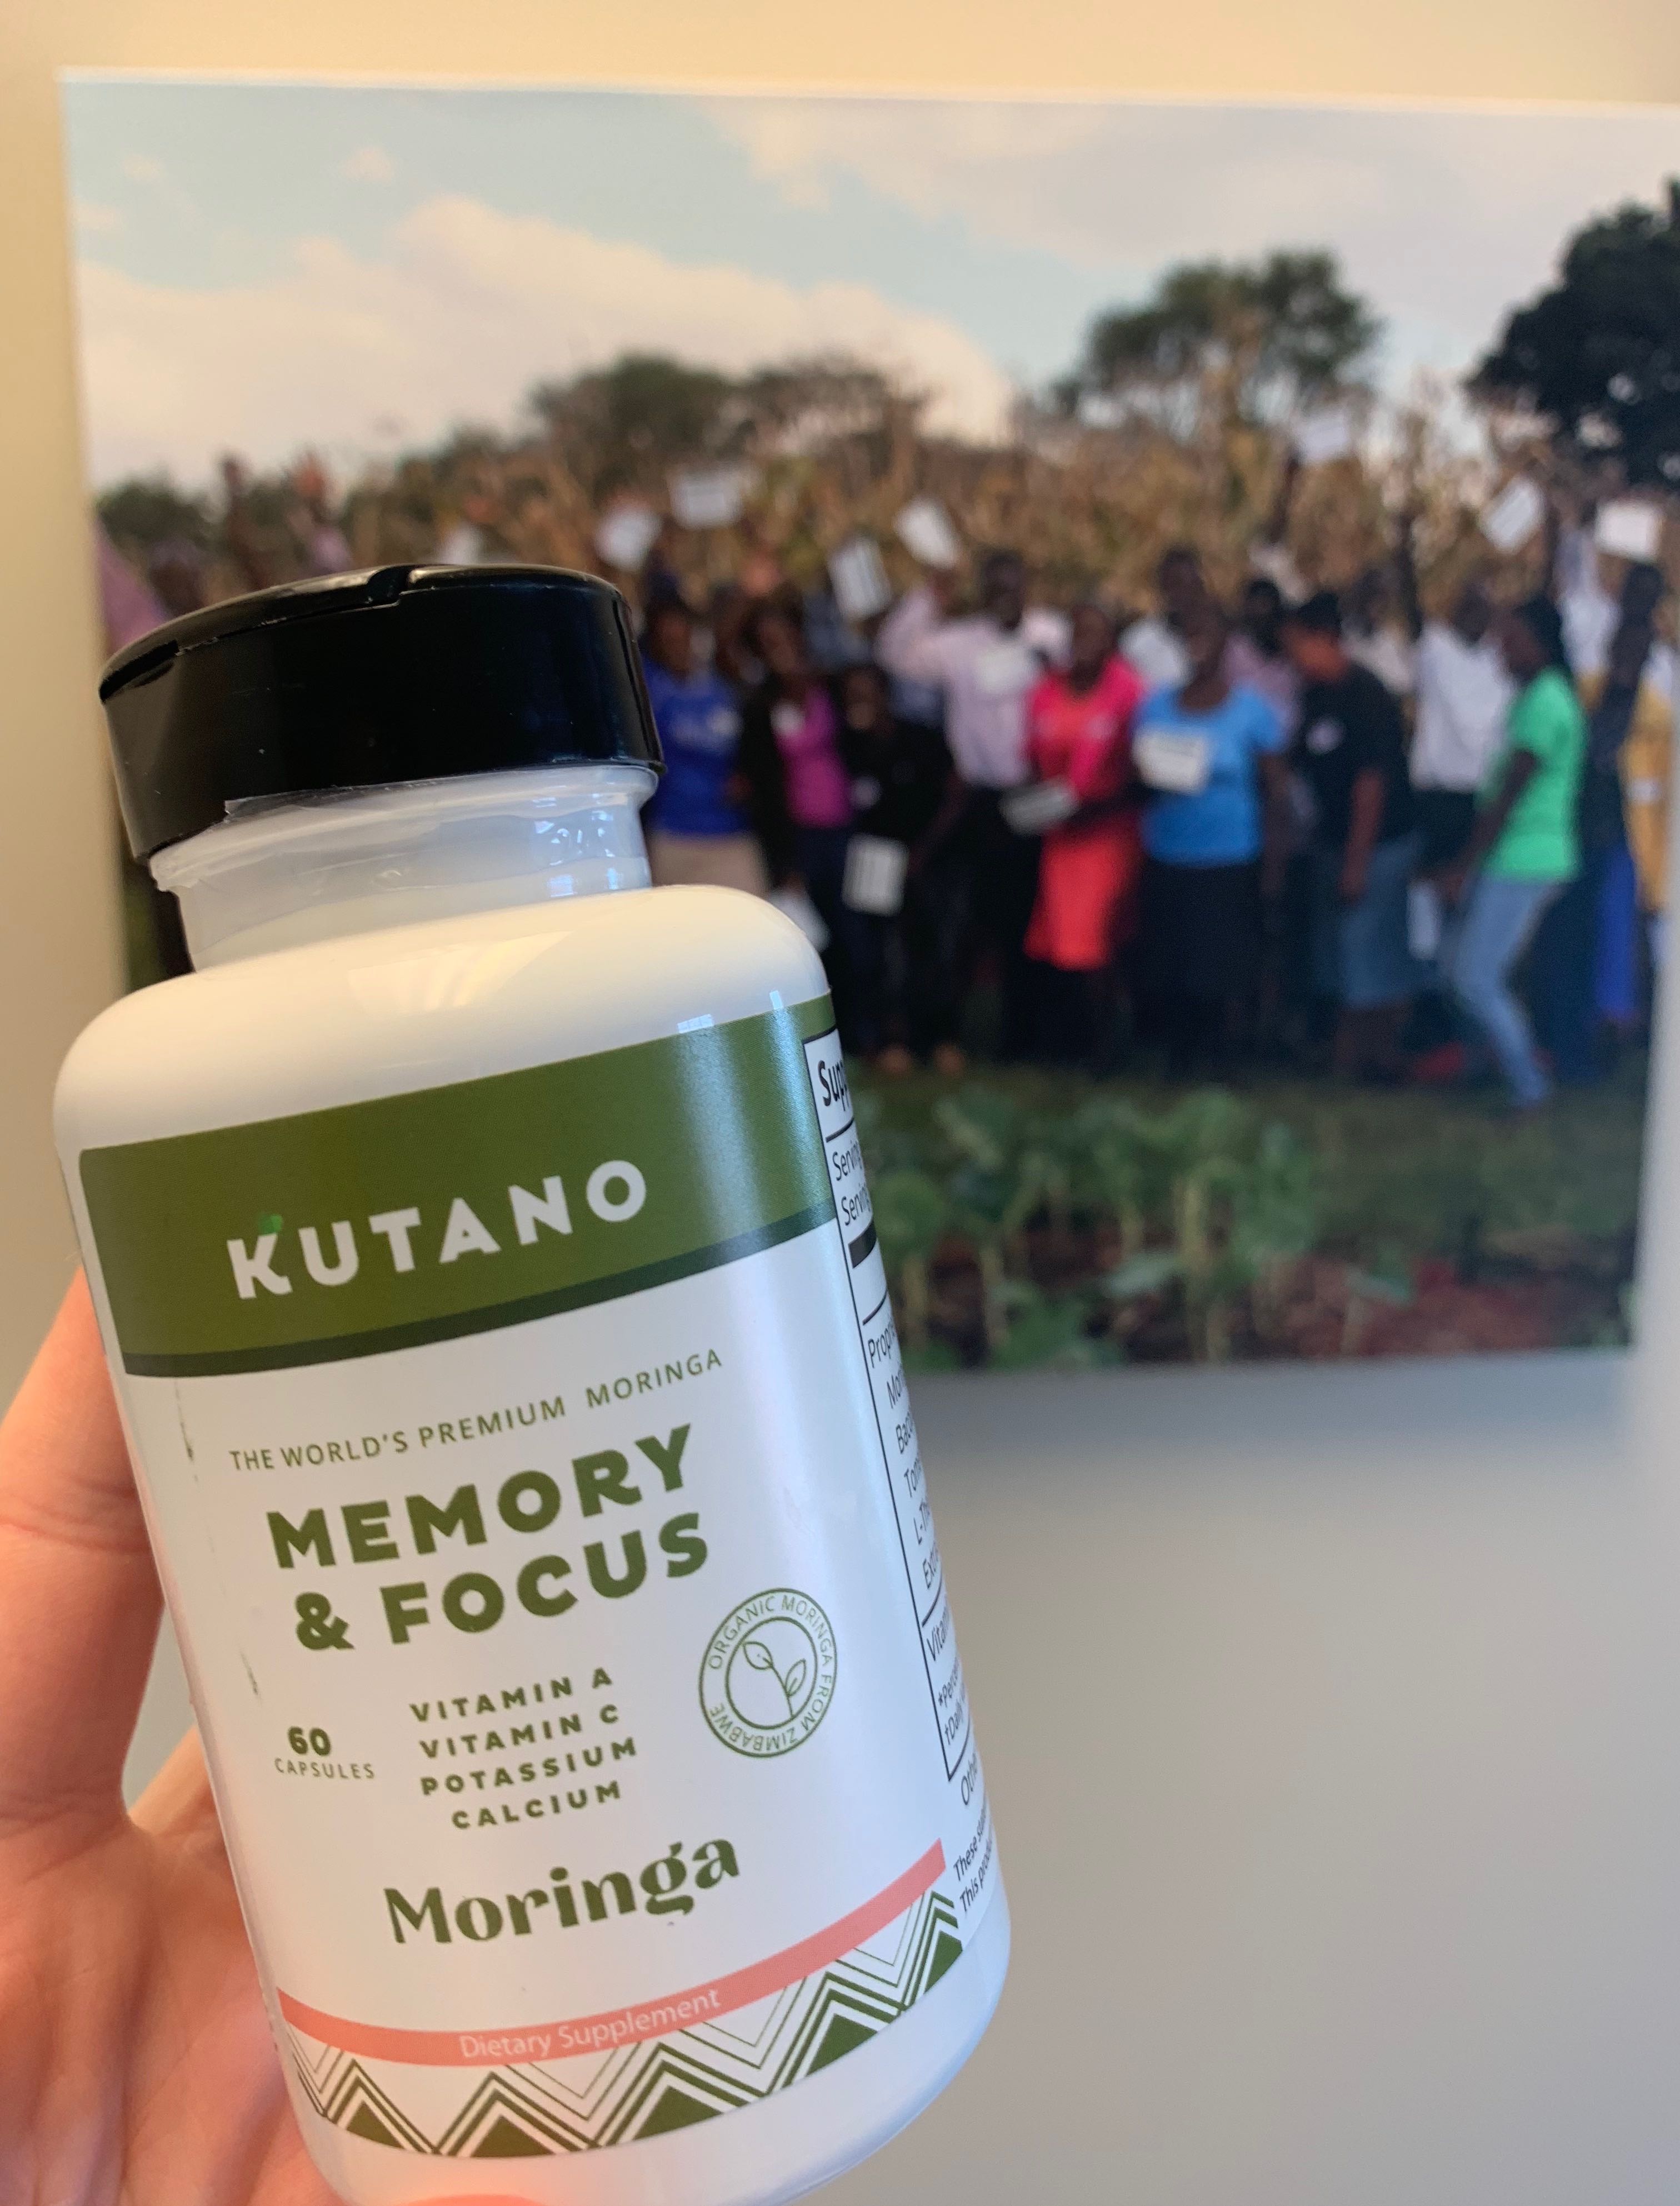 We’ve Got Proof Moringa Is Made for Memory